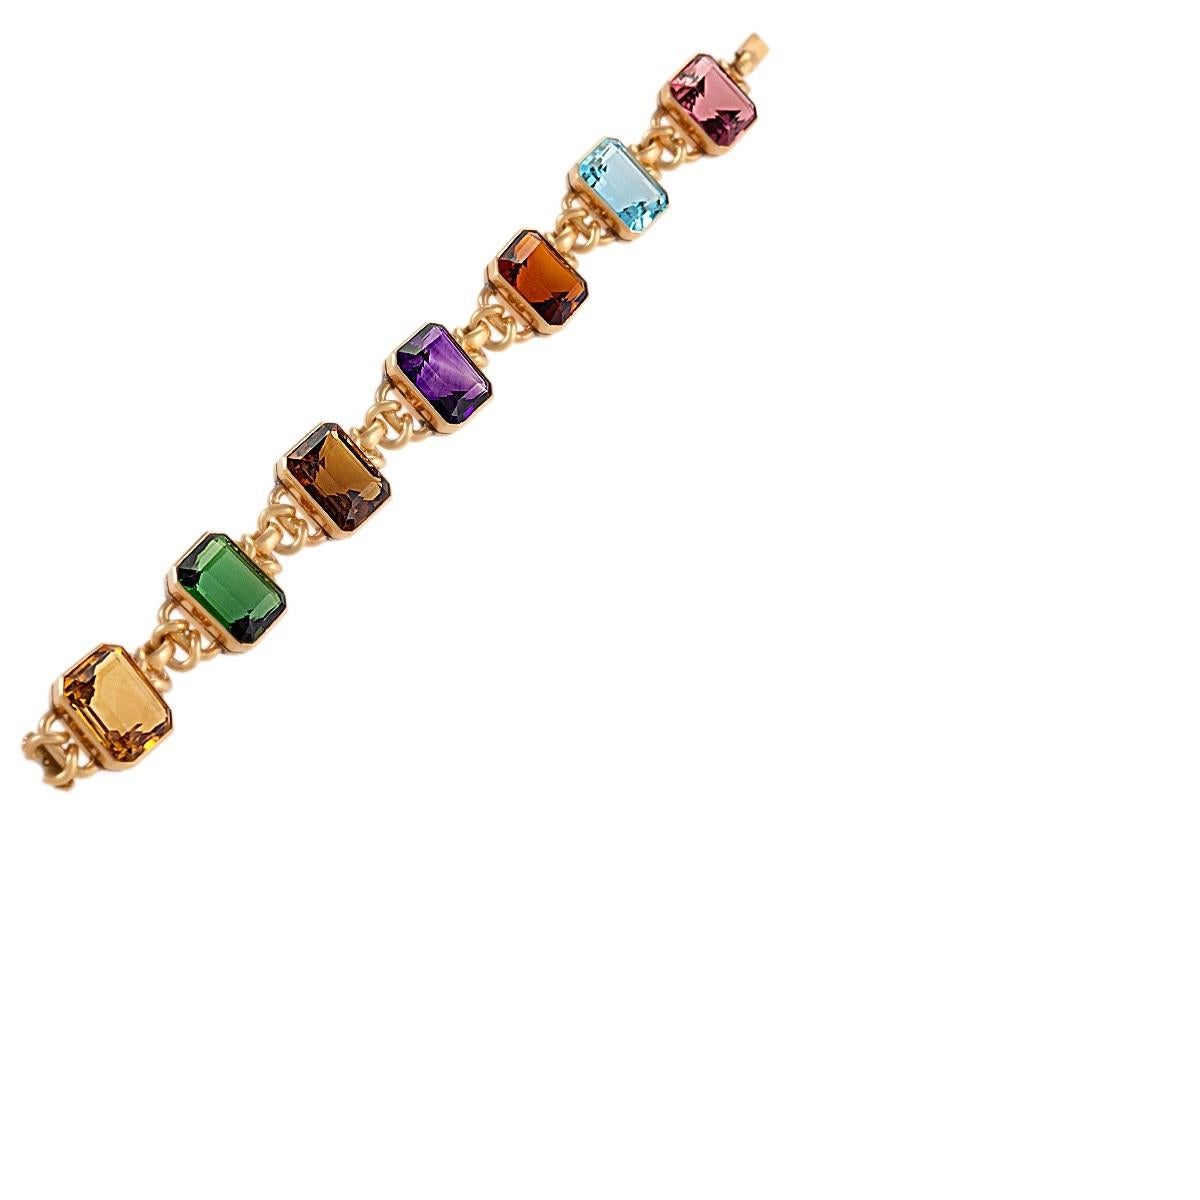 An Estate 18 karat gold bracelet with amethyst, aquamarine, citrine and garnet. Each of the gemstones in this fetching, fun yet elegant bracelet are equally sized, and connected with stylized gold links, adding a subtle element of design to the